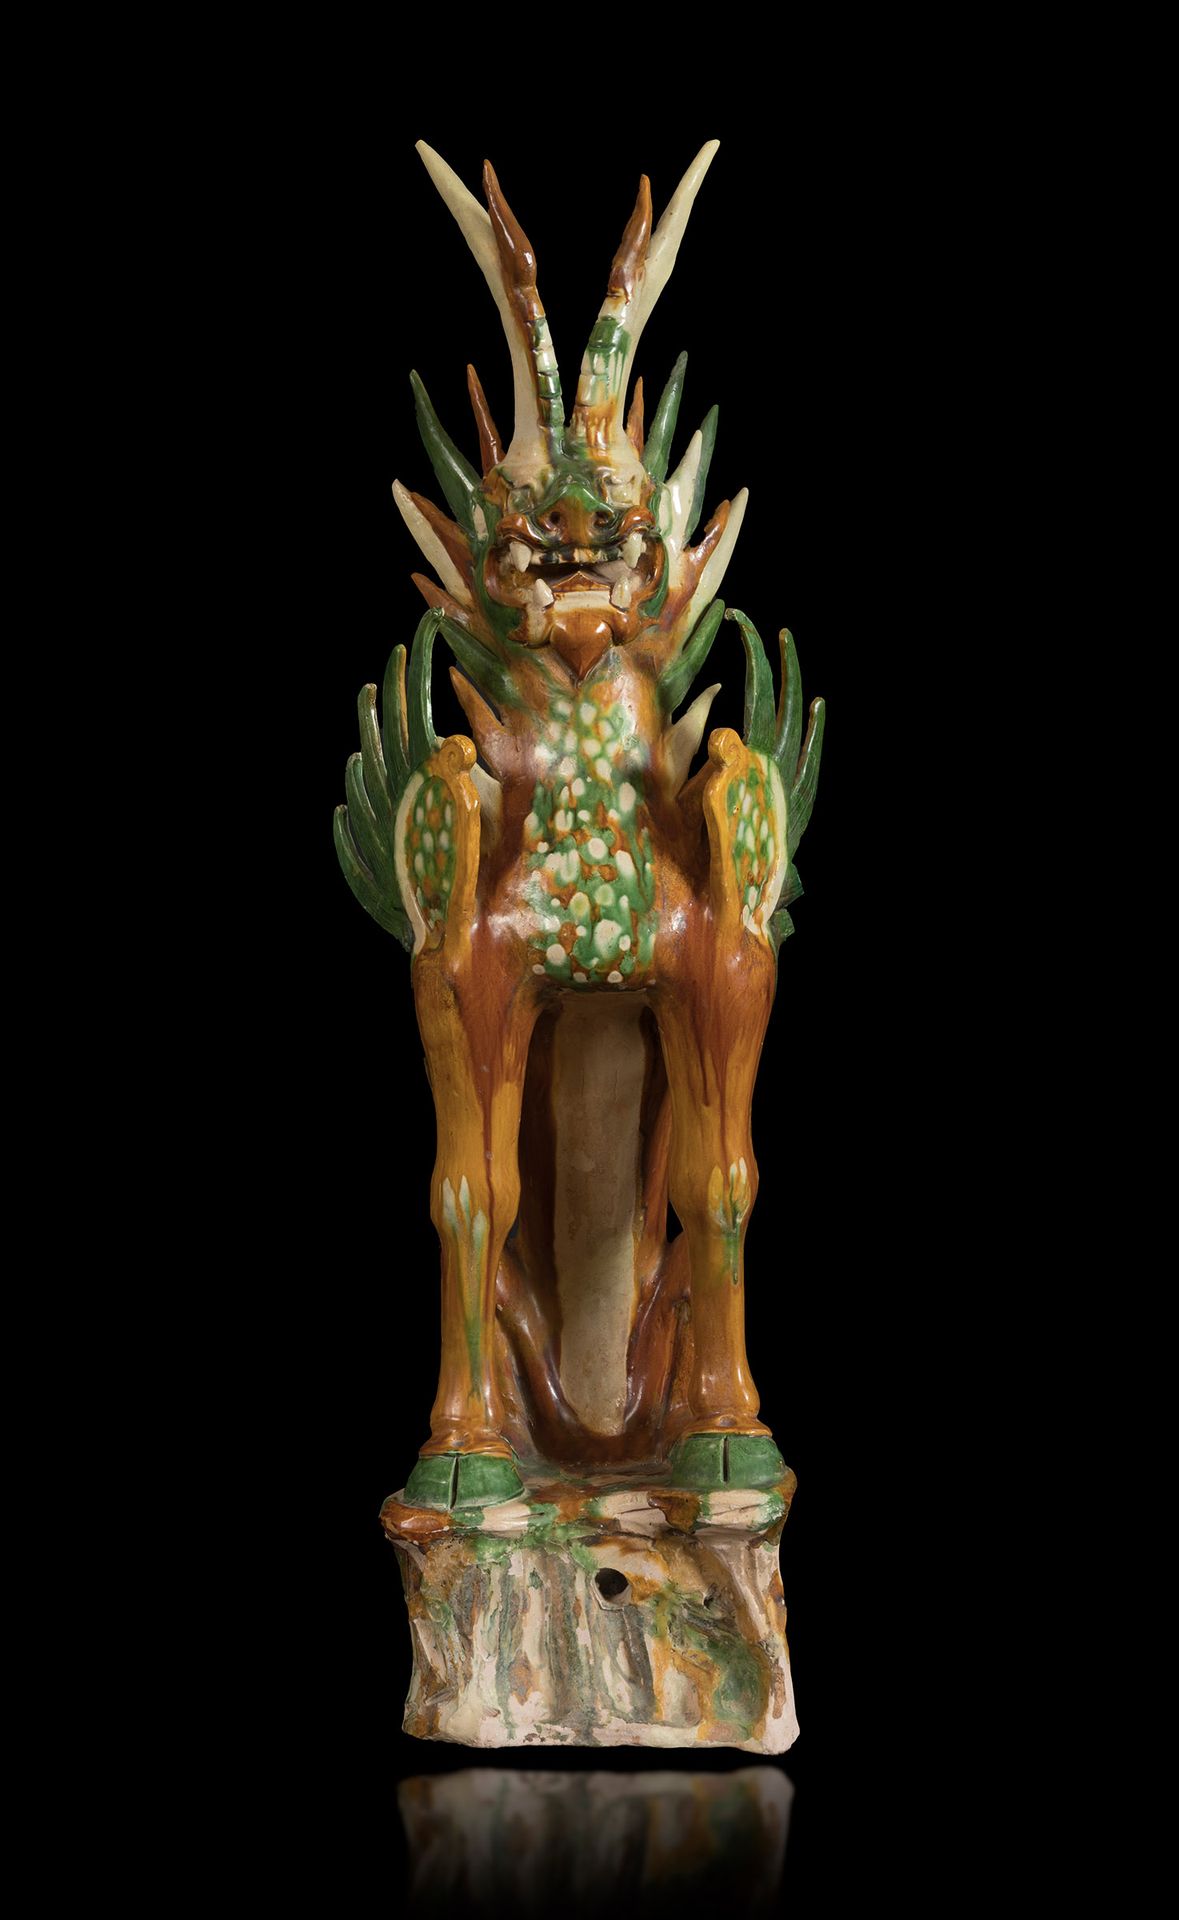 Null Guardian of the Sancai Temple. China, Tang Dynasty, AD 618-907.
Glazed terr&hellip;